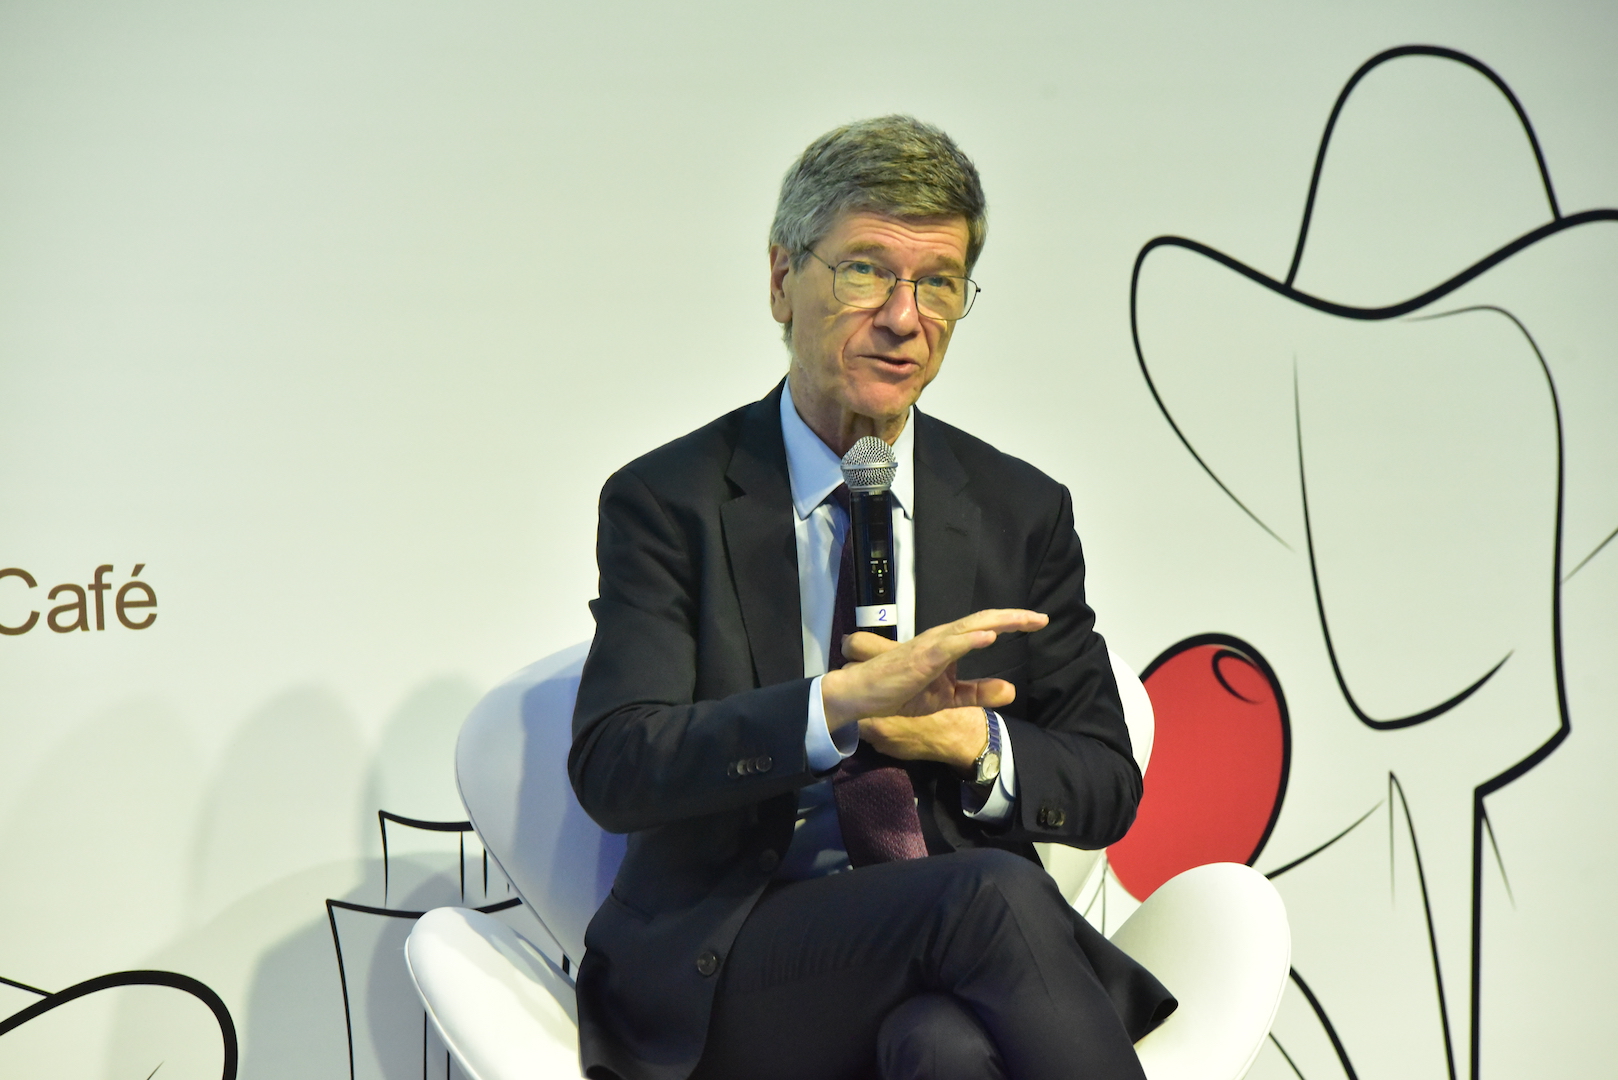 Brazil,US policy analyst, Jeffrey Sachs explains his Global Coffee Fund at the 2nd World Coffee Producers Forum in Campinas, Brazil.